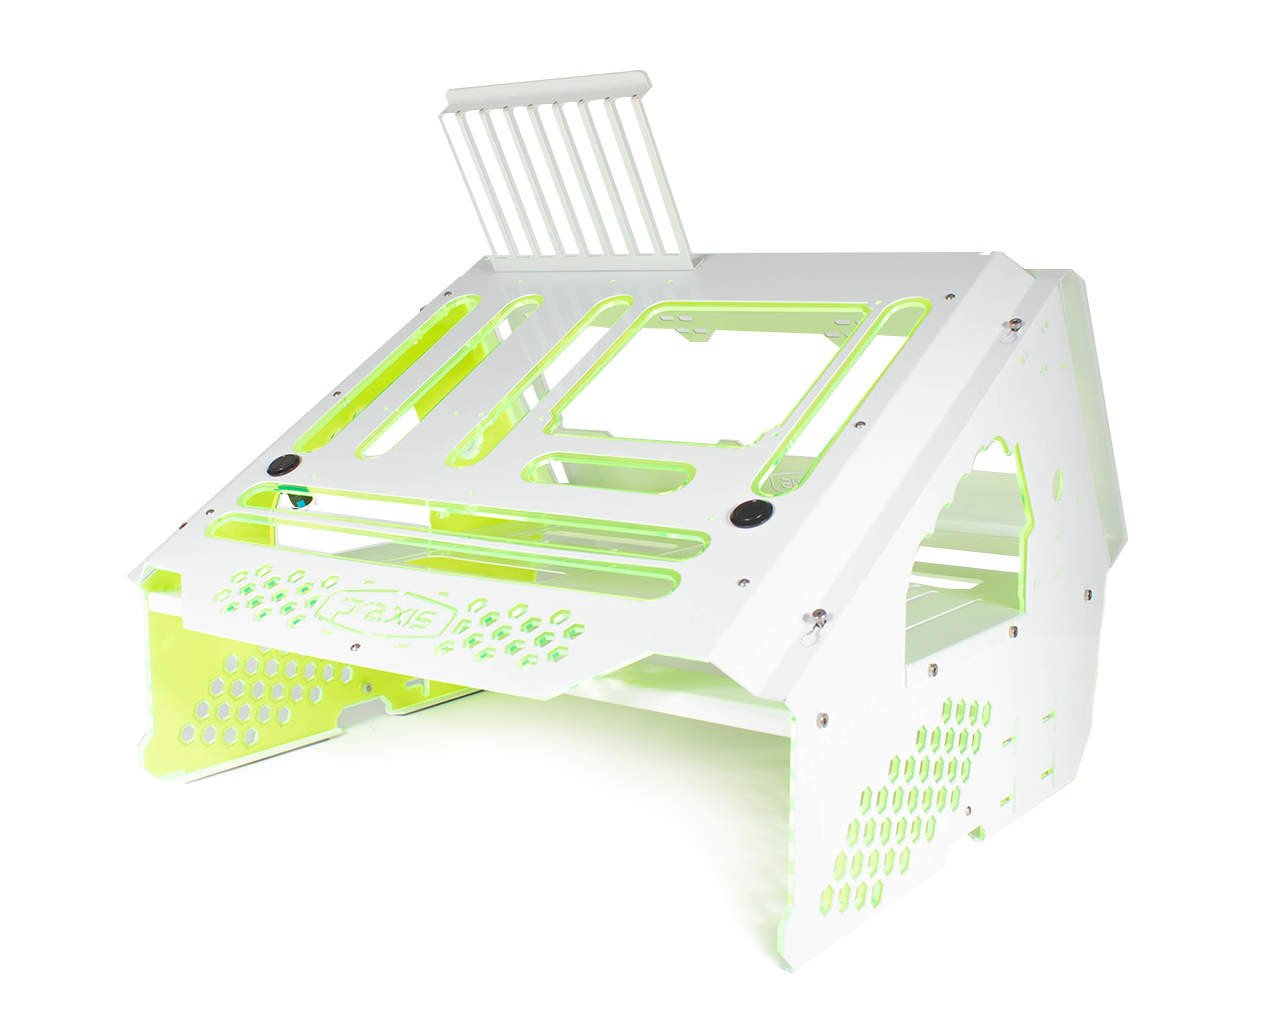 PrimoChill's Praxis Wetbench Powdercoated Steel Modular Open Air Computer Test Bench for Watercooling or Air Cooled Components - PrimoChill - KEEPING IT COOL White w/UV Green Accents